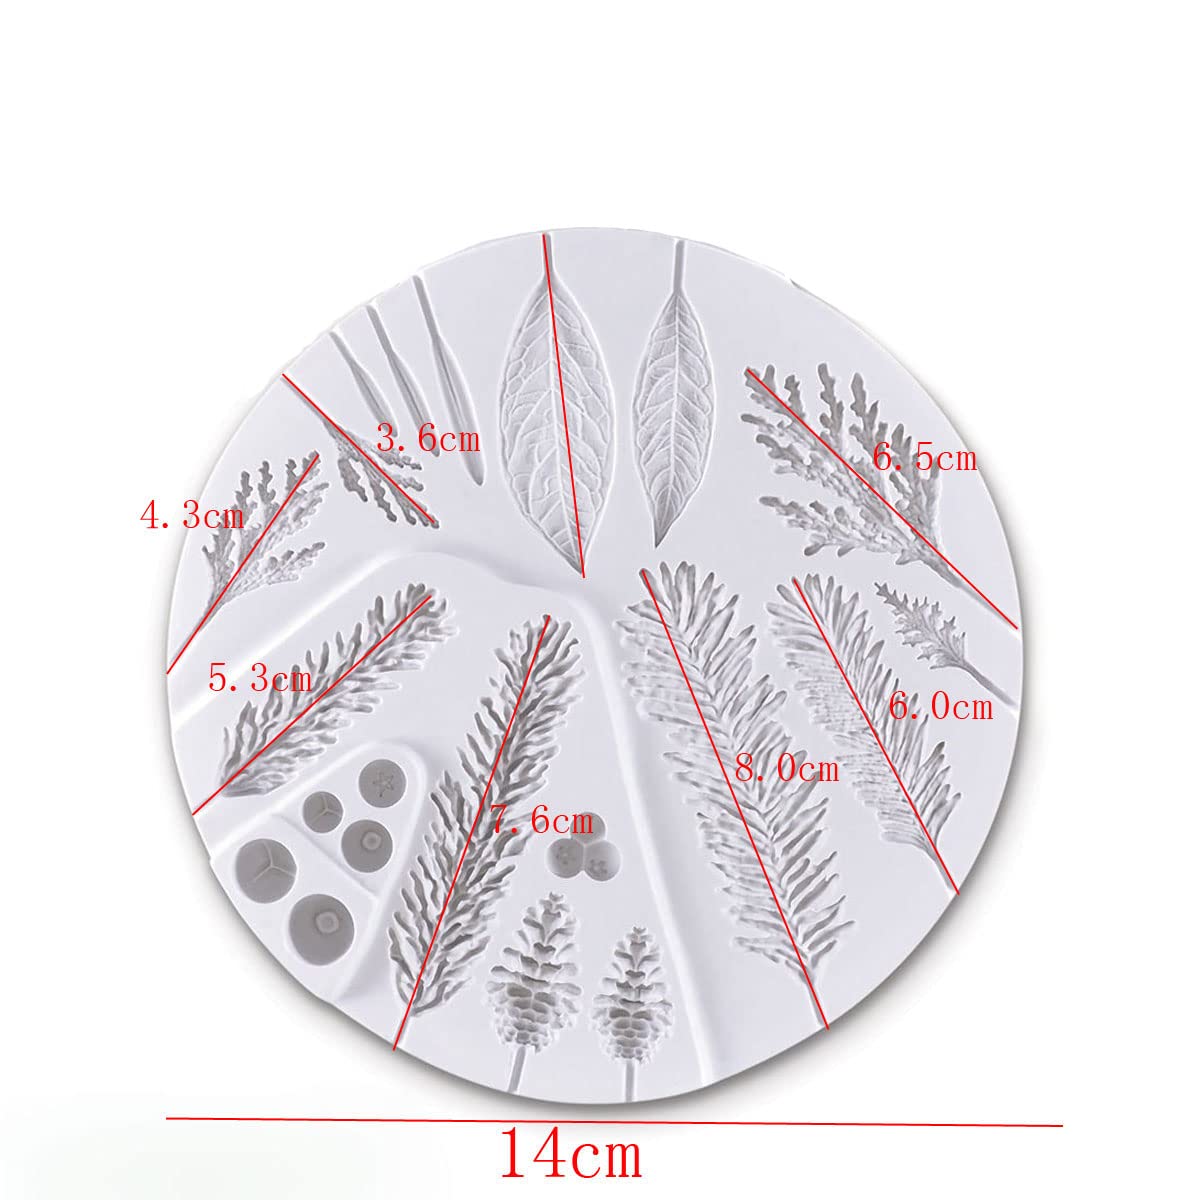 ZHUOJIE Winter Foliage Flower Pro Mould Silicone Mold Fondant Cake Decorating Tool Gumpaste Sugarcraft Chocolate Forms Bakeware Tools